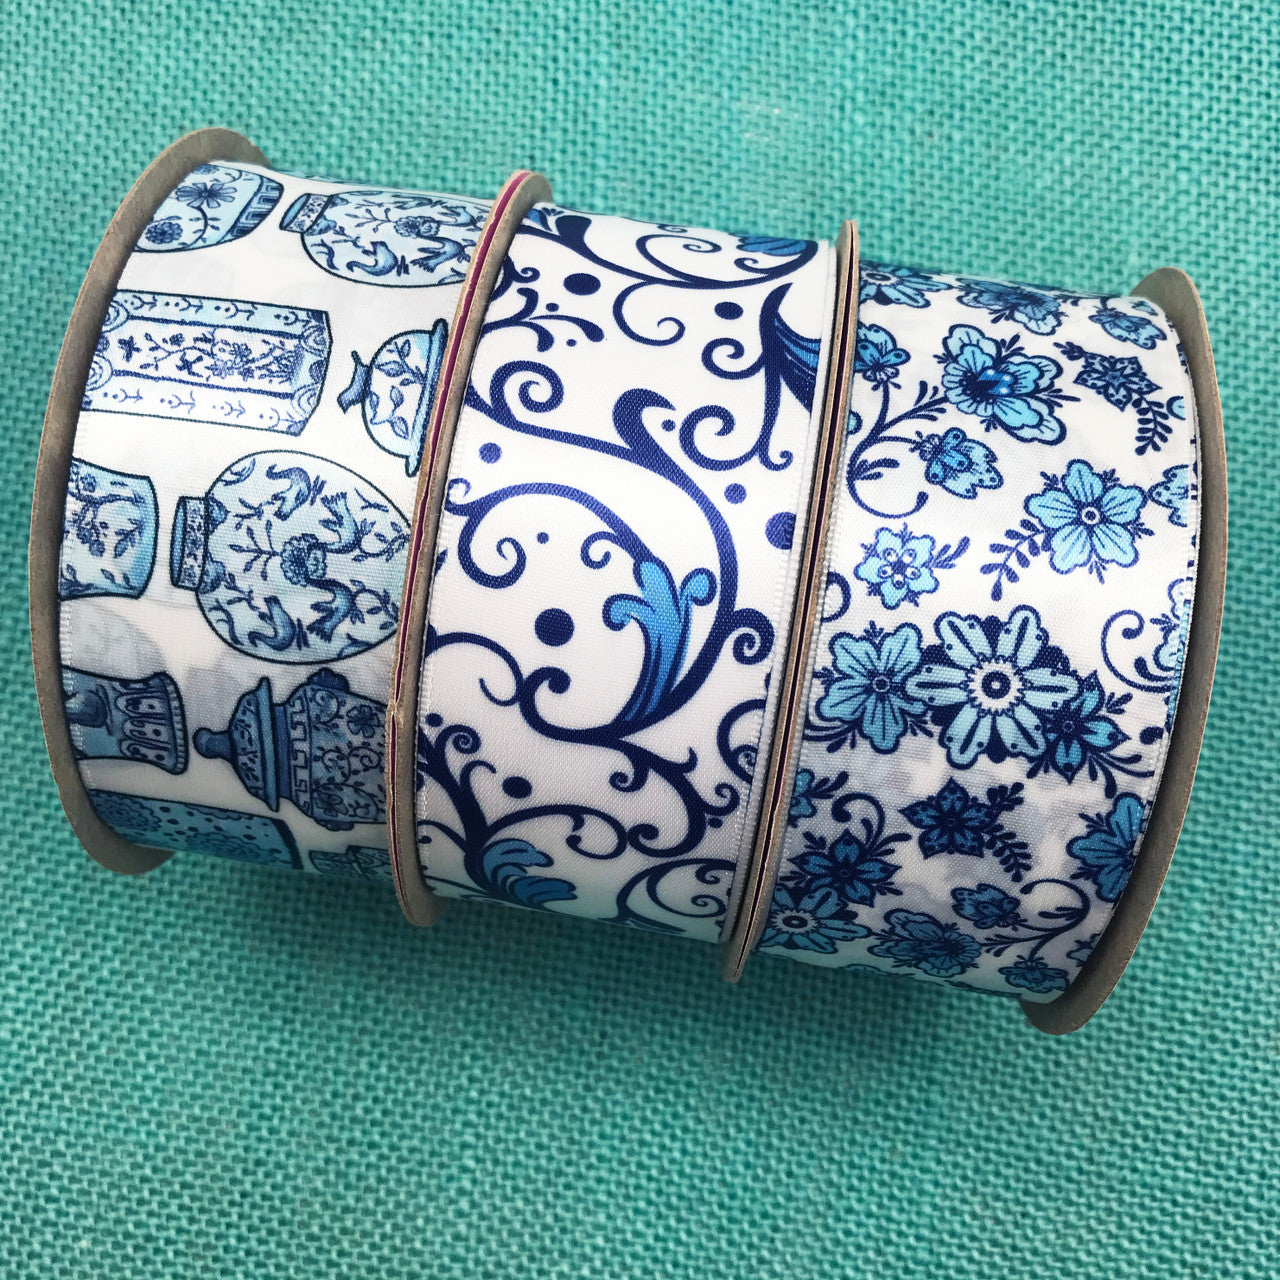 Chinoiserie Ginger jar filigree design ribbon in blue and white printed on 1.5" white single face satin